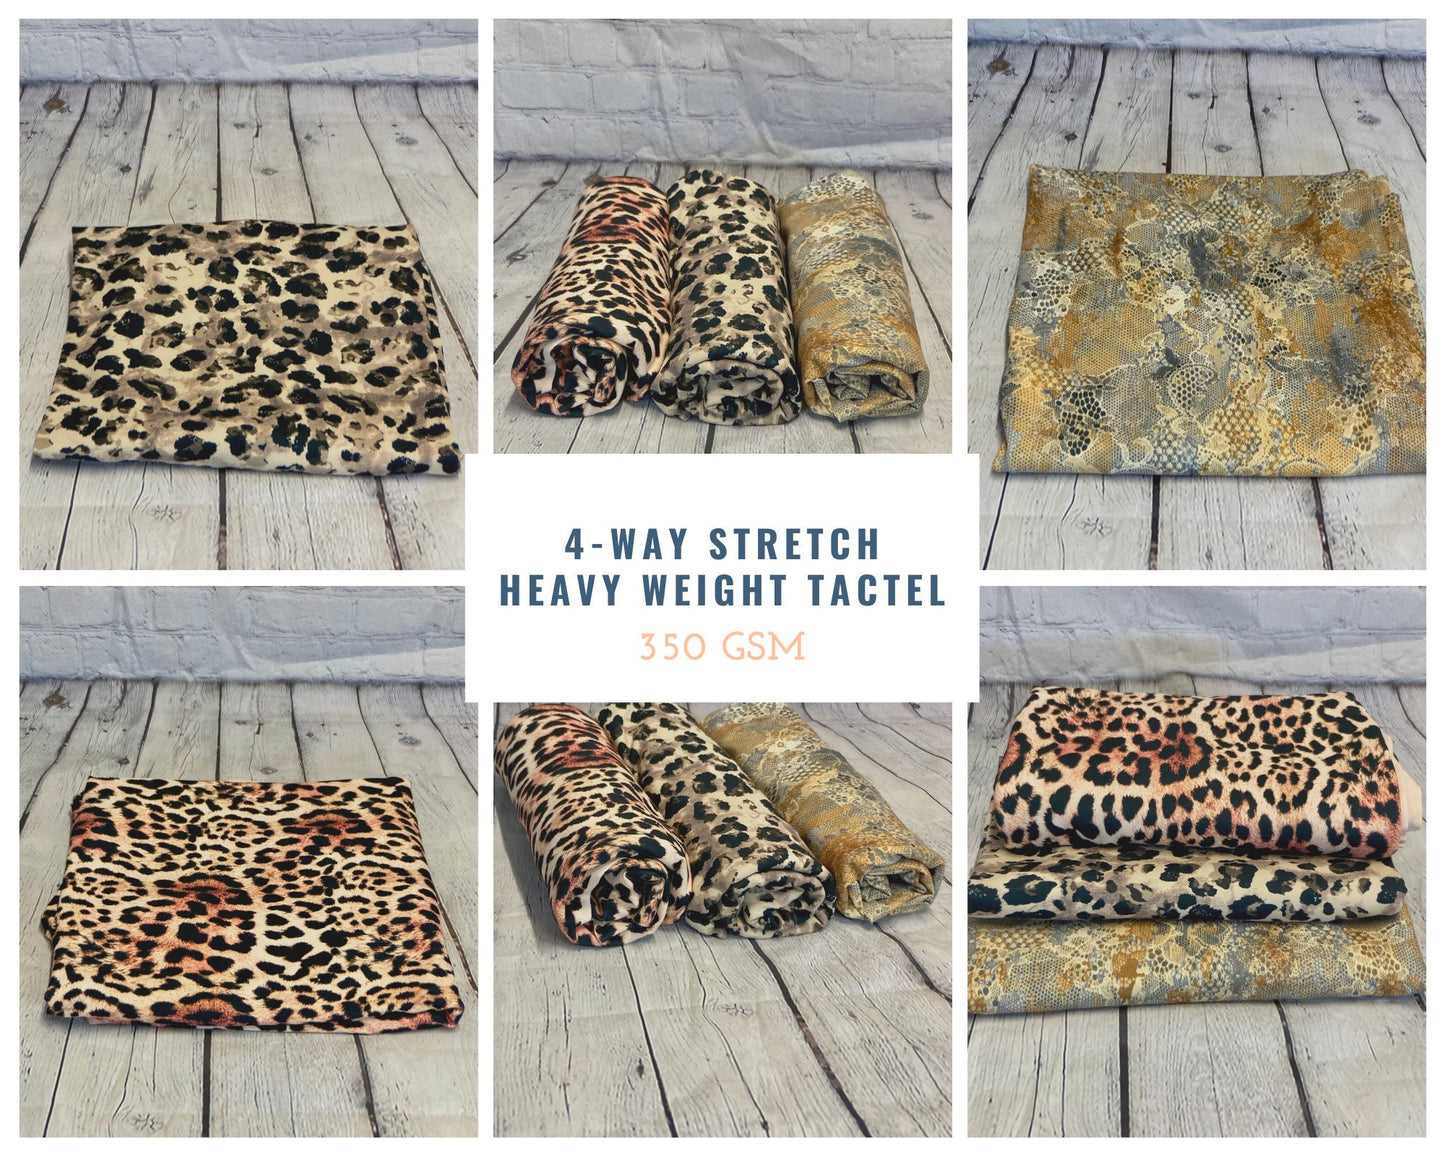 4-Way Stretch Heavy Weight Tactel Cheetah Leopard Animal Print for Leggings, Work Out Gear, Biker Shorts, Swimwear Fabric By The Yard